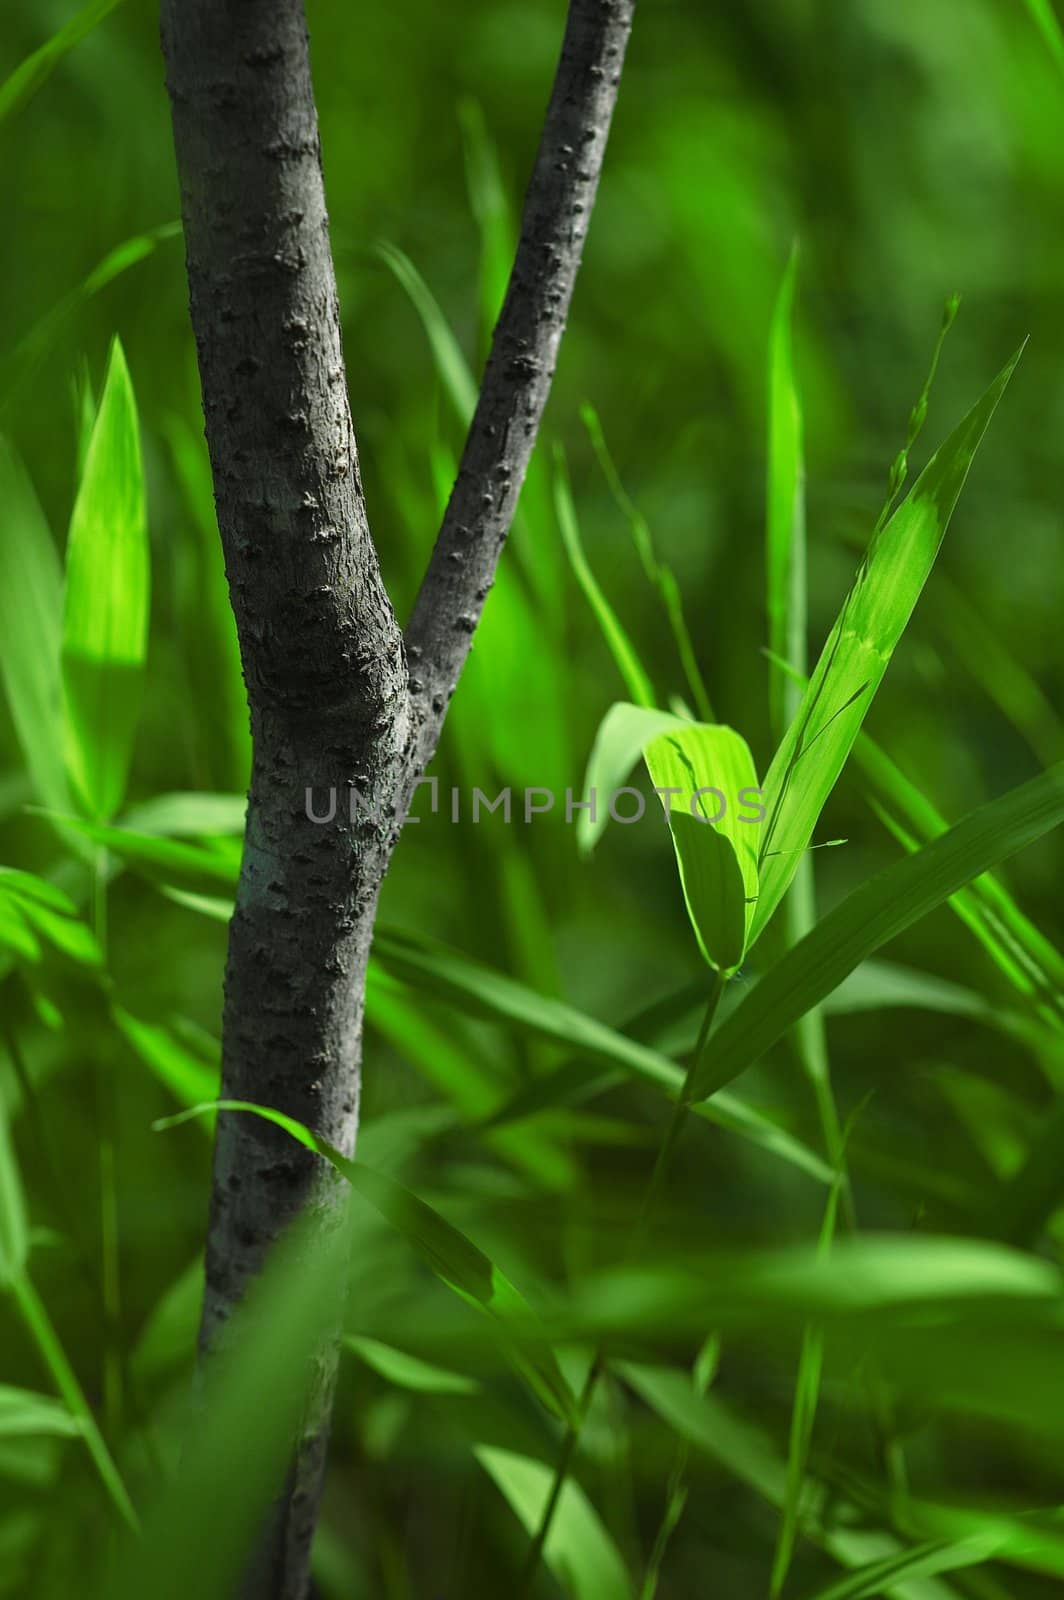 Tree branch surrounded by green grass.